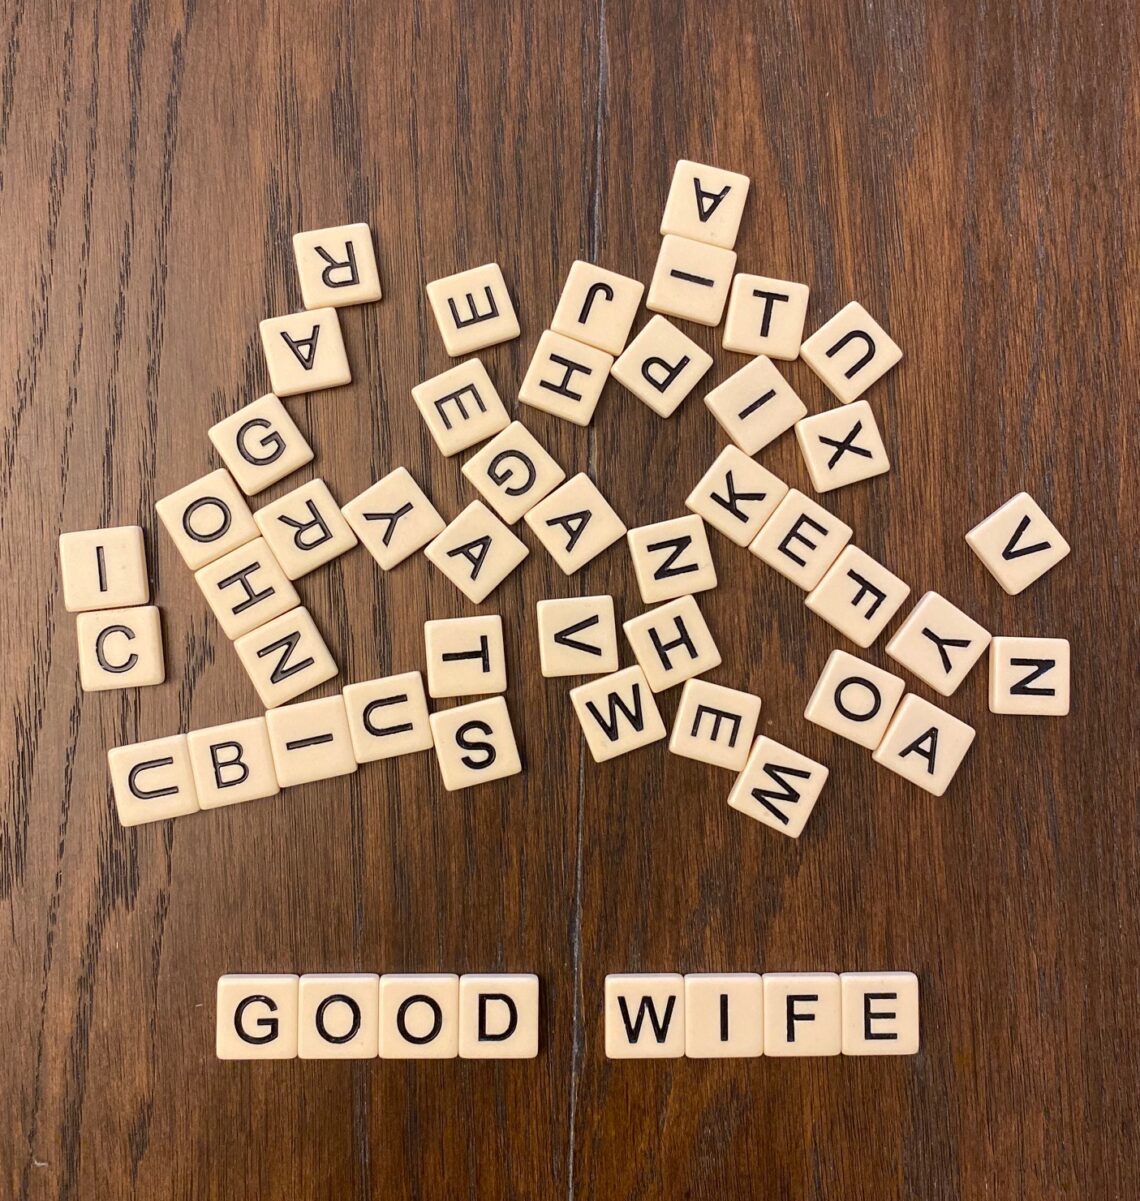 scattered scrabble tiles on brown wooden surface spelling good wife